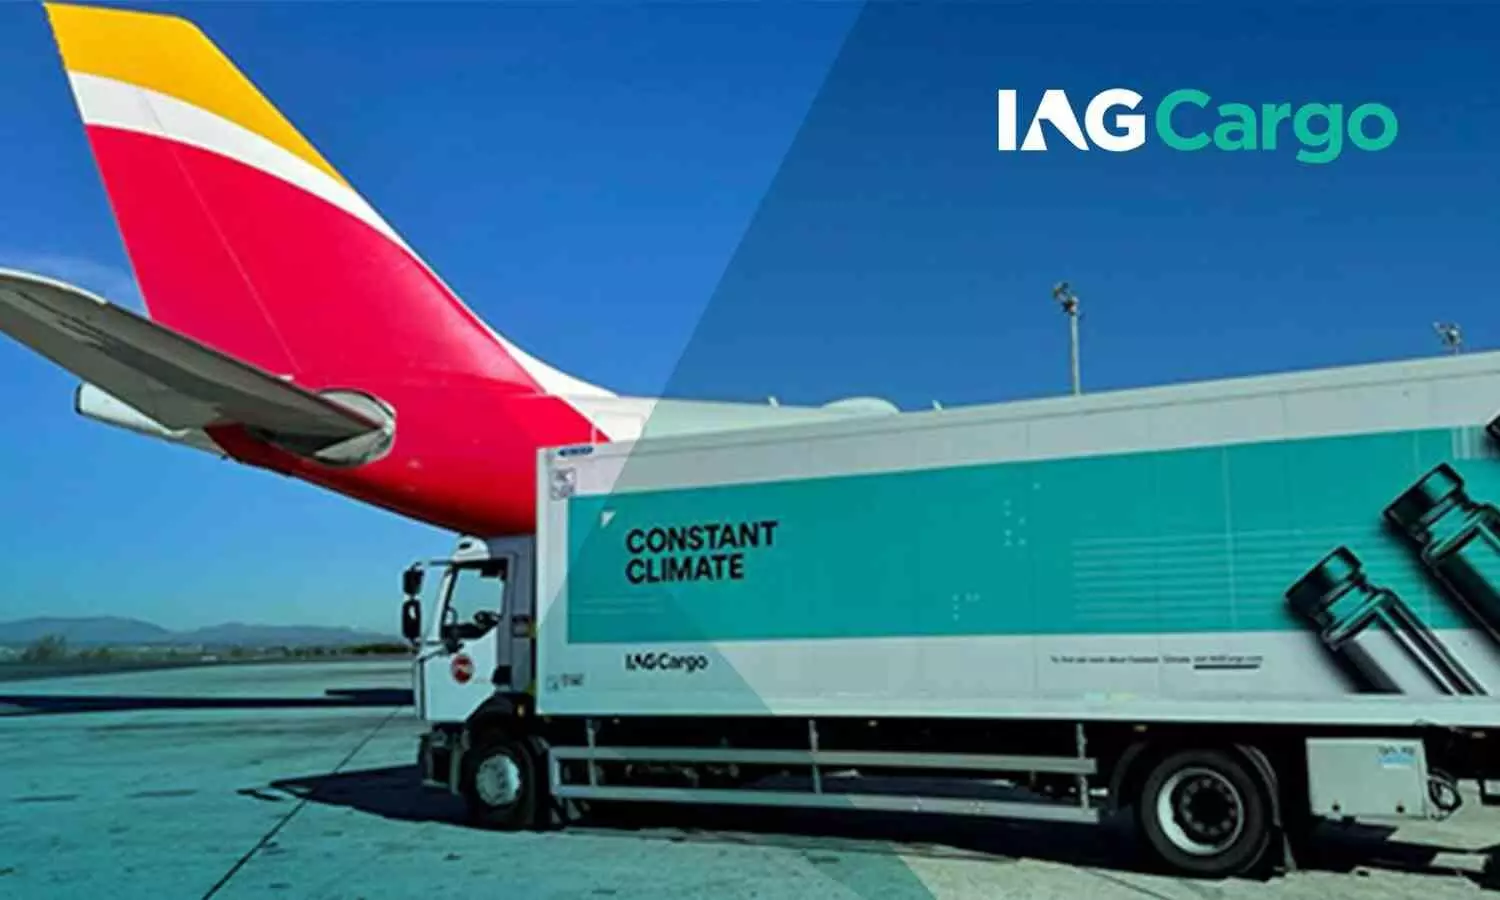 IAG Cargo joins Neutral Air Partner as airline partner